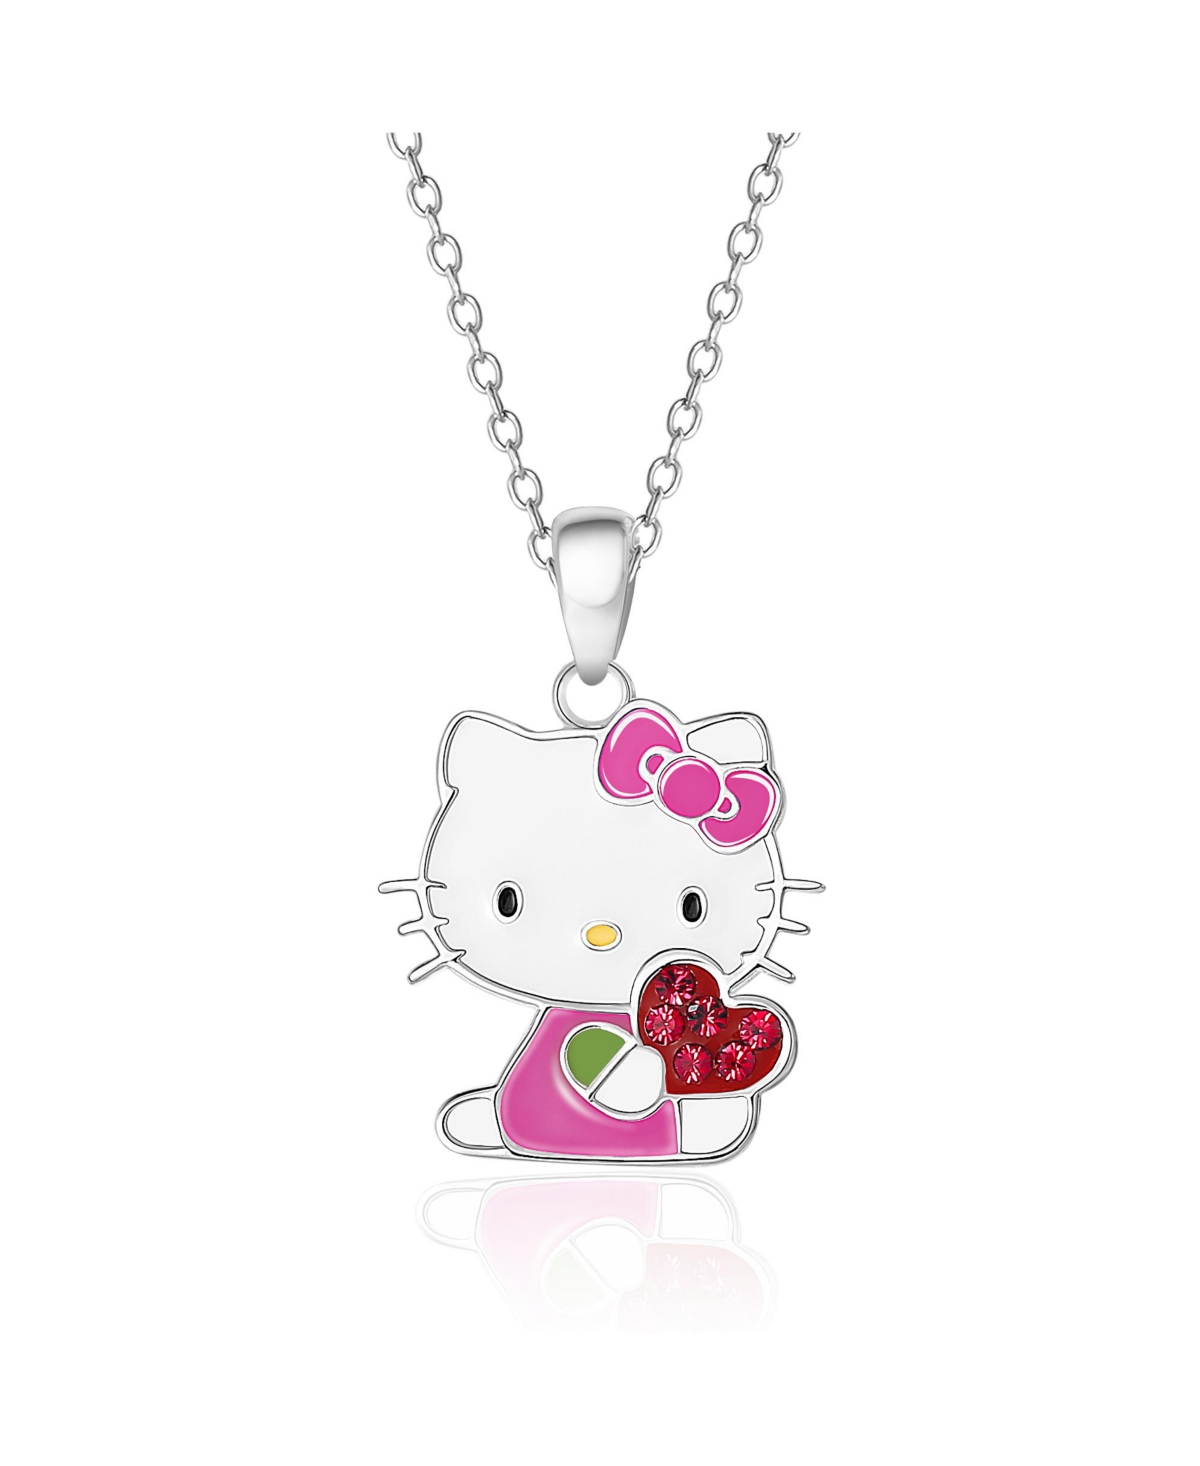 Sanrio Hello Kitty Enamel and Red Crystal Pendant - 18'' Chain, Authentic Officially Licensed - Pink, white